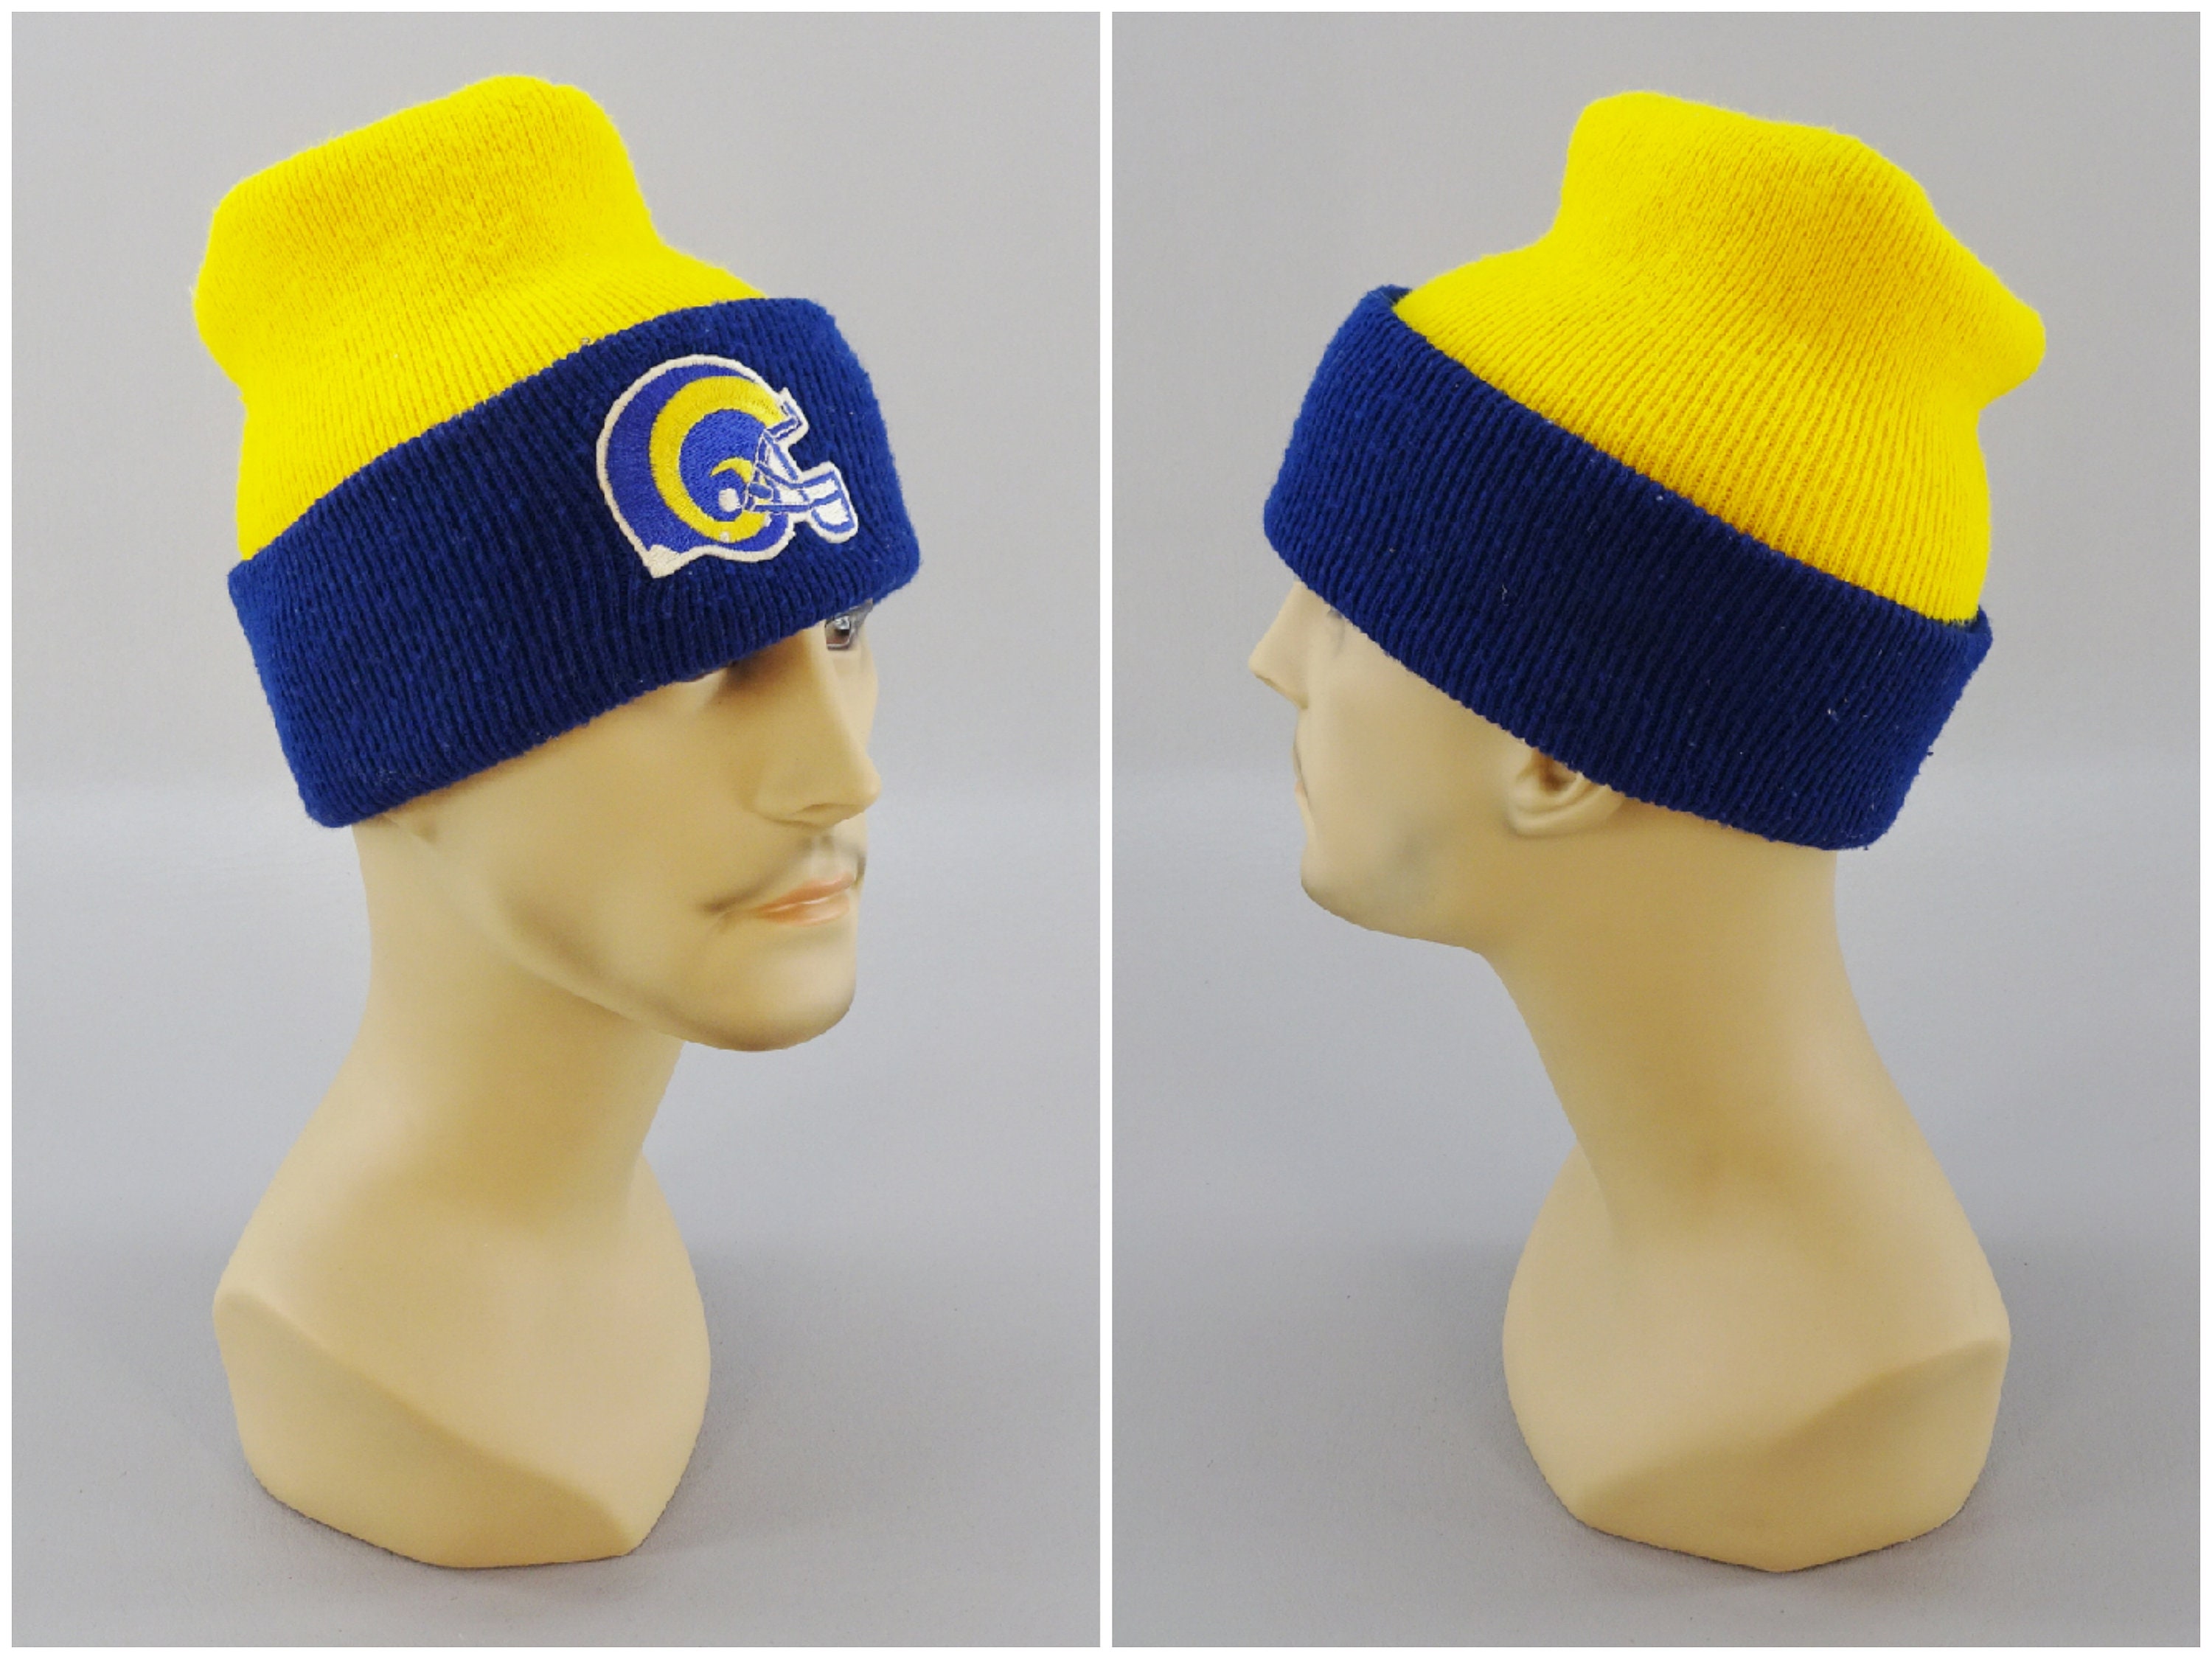 1970S - 1980S Vintage Los Angeles Rams Knit Stocking Ski Cap, Blue & Yellow Nfl Football Fan Sports Wear Collectibles, One Size Small Xl